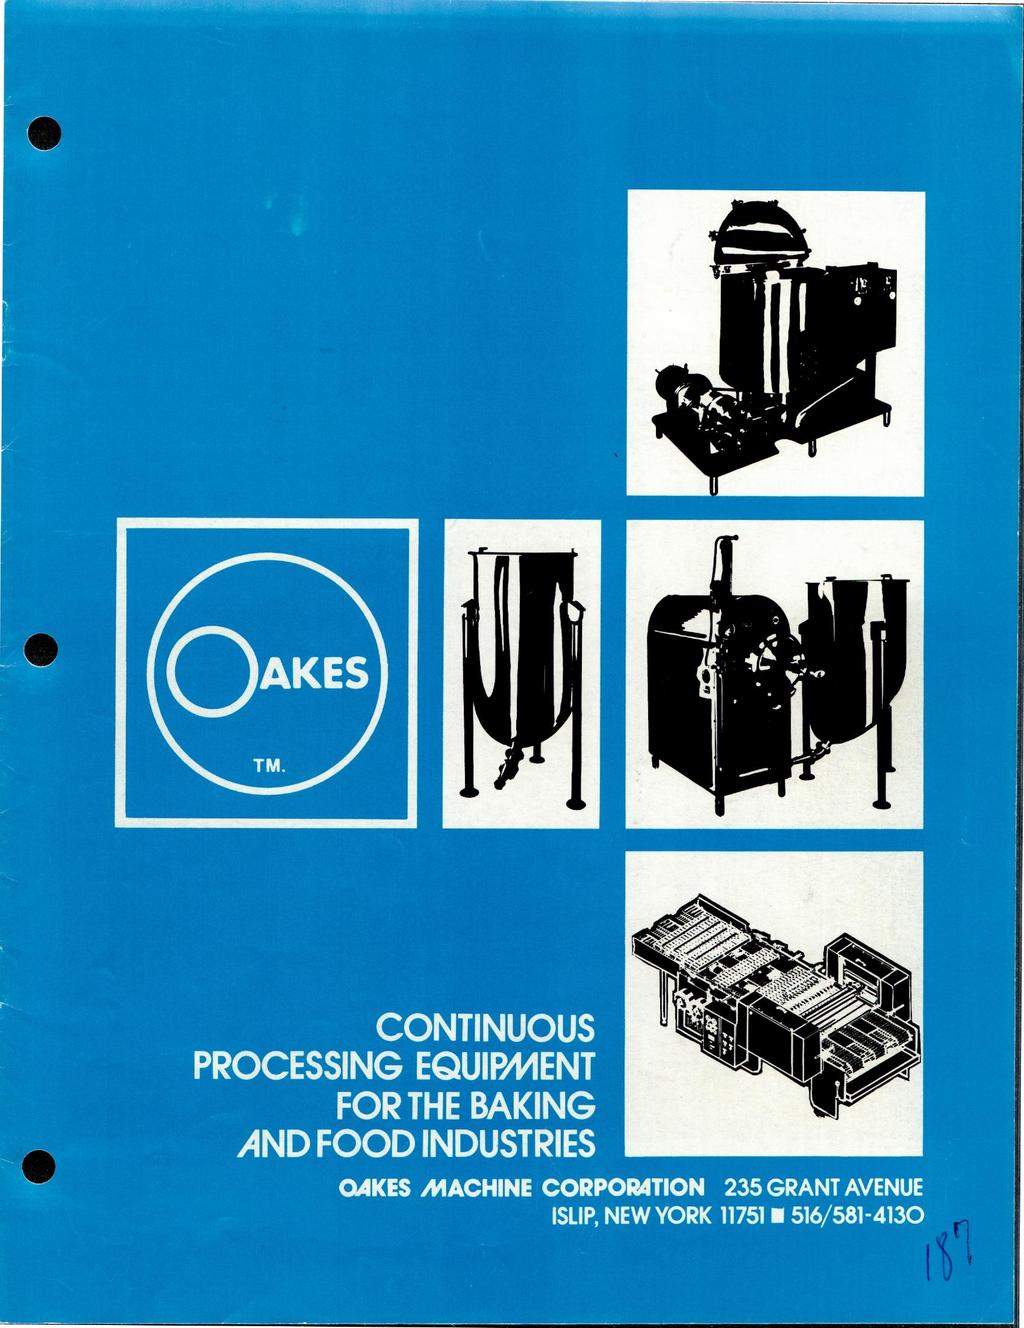 C S PROCESSING EQ u k1 T FOR THE BAKING FOOD INDUSTRIES OAKES